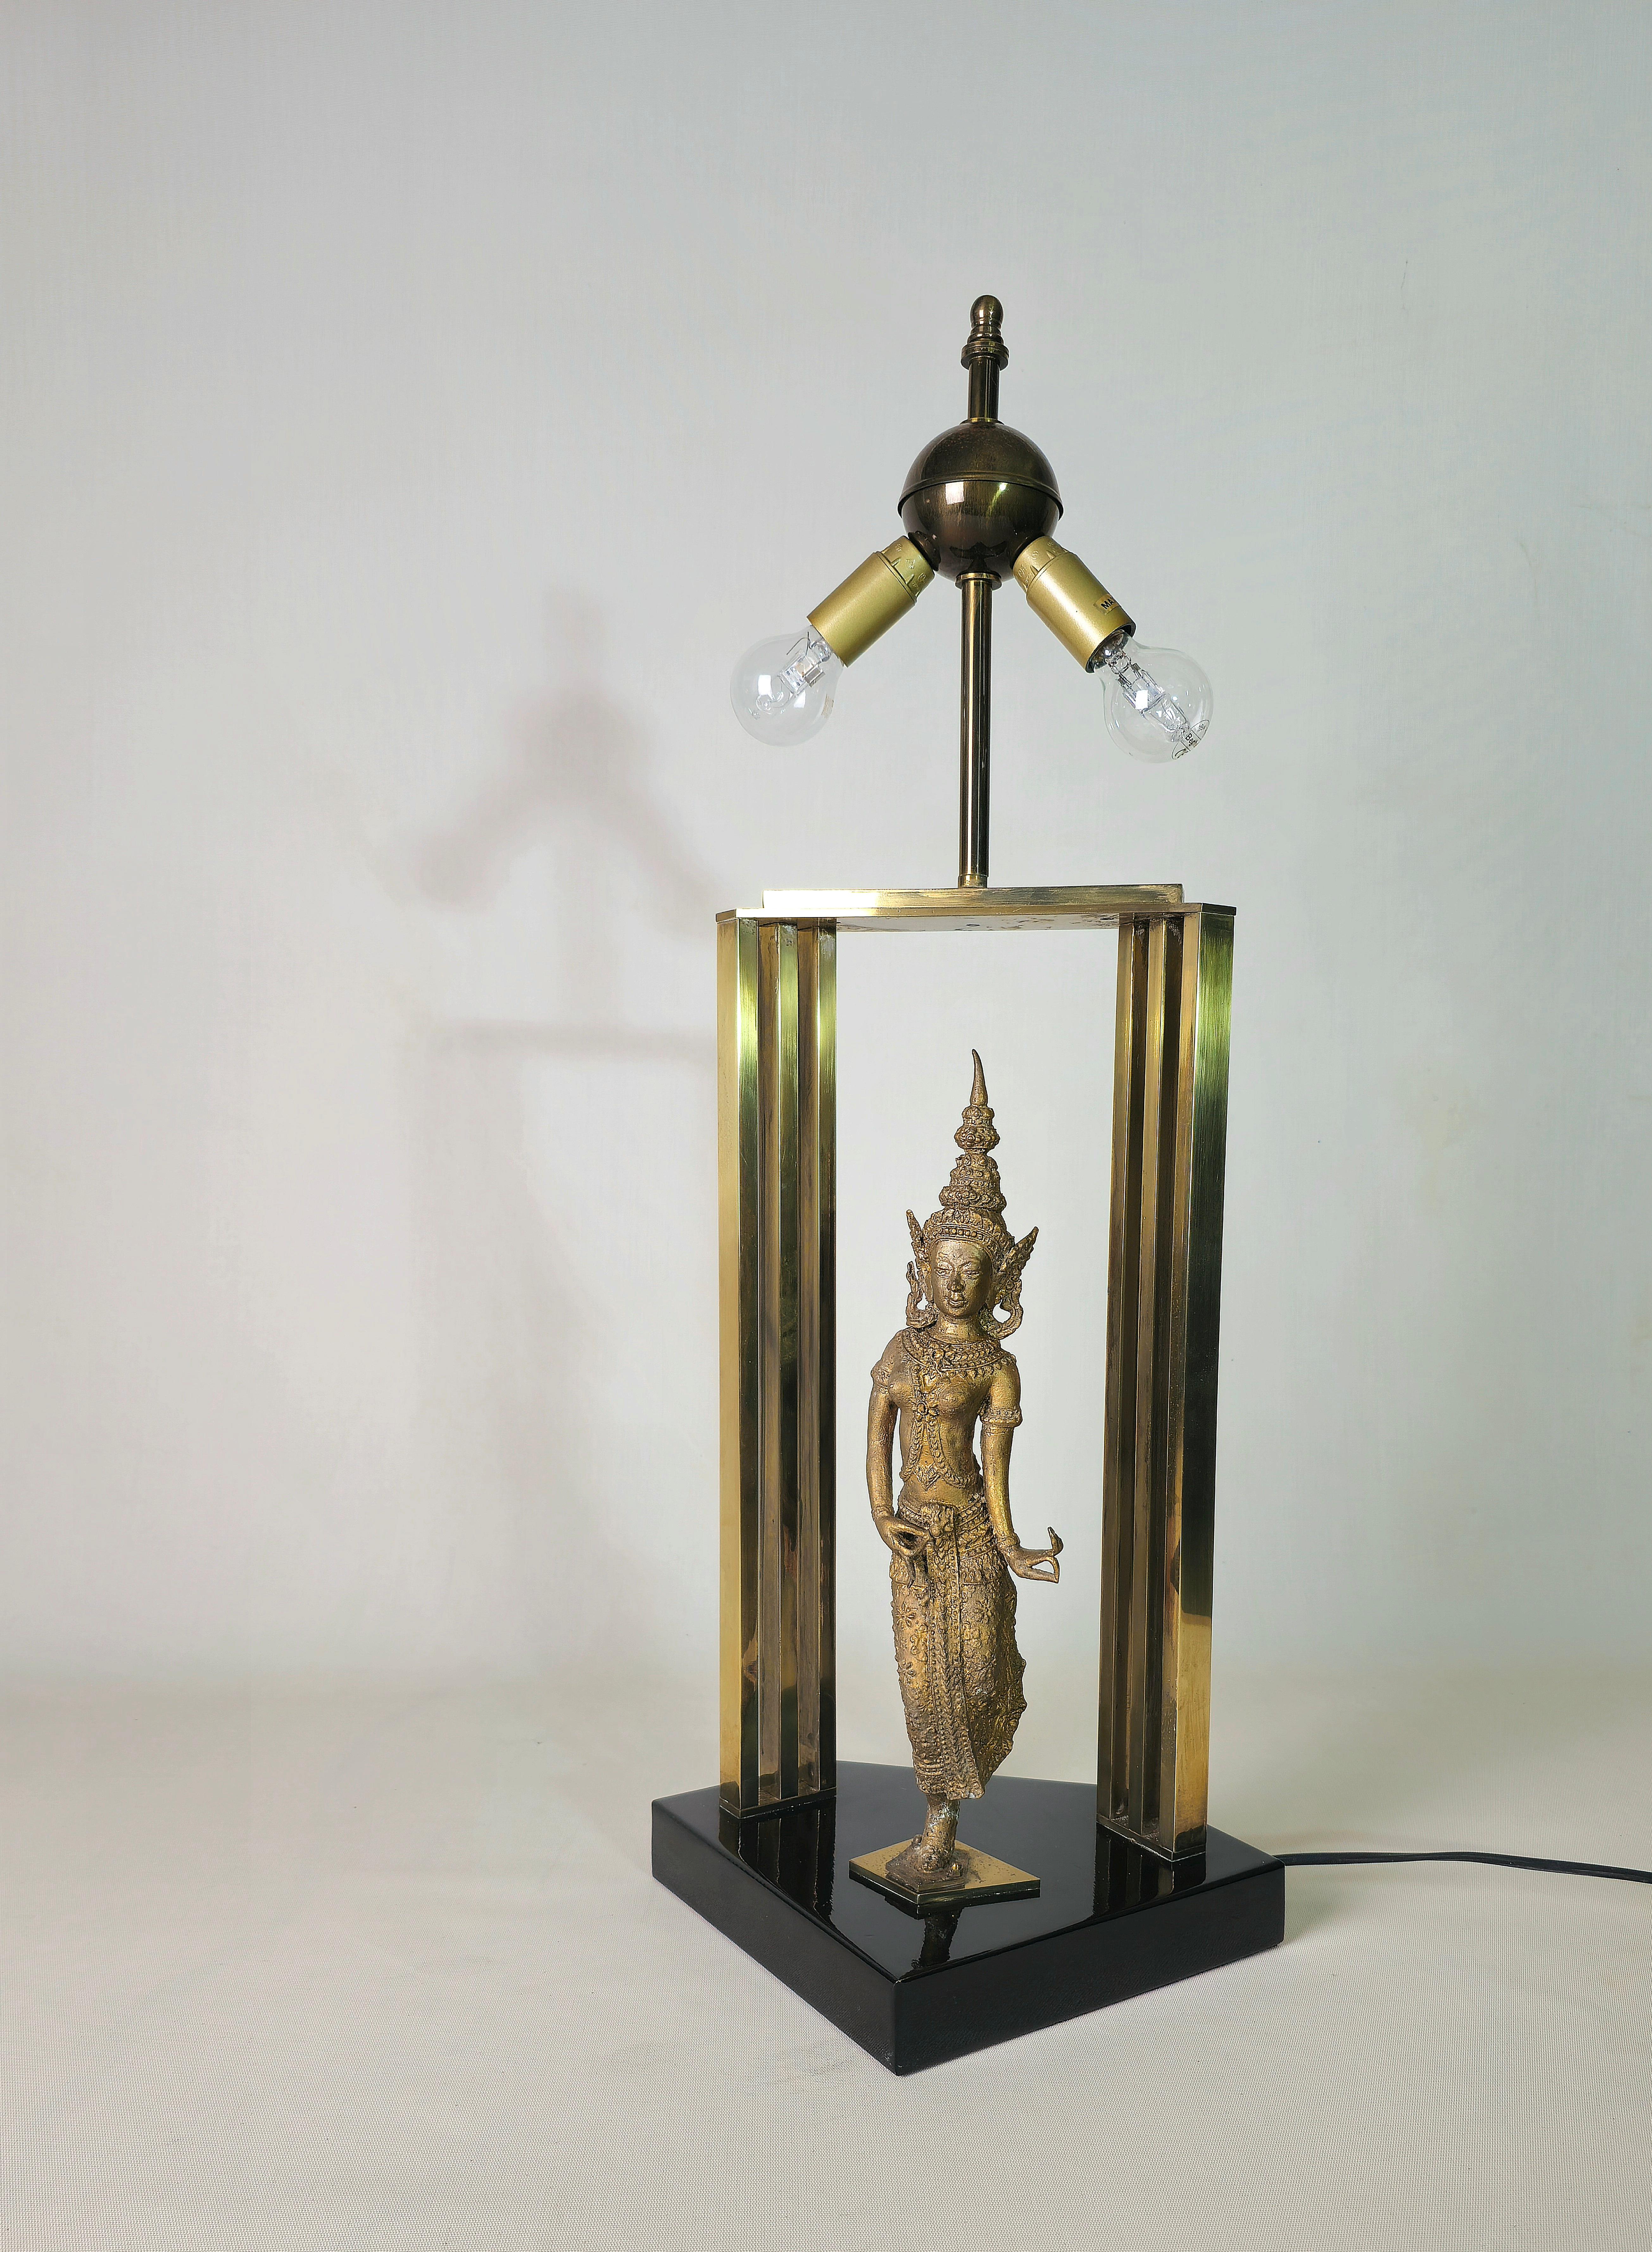 Table Lamps Brass Midcentury Modern Design Italy 1960/70s In Good Condition For Sale In Palermo, IT